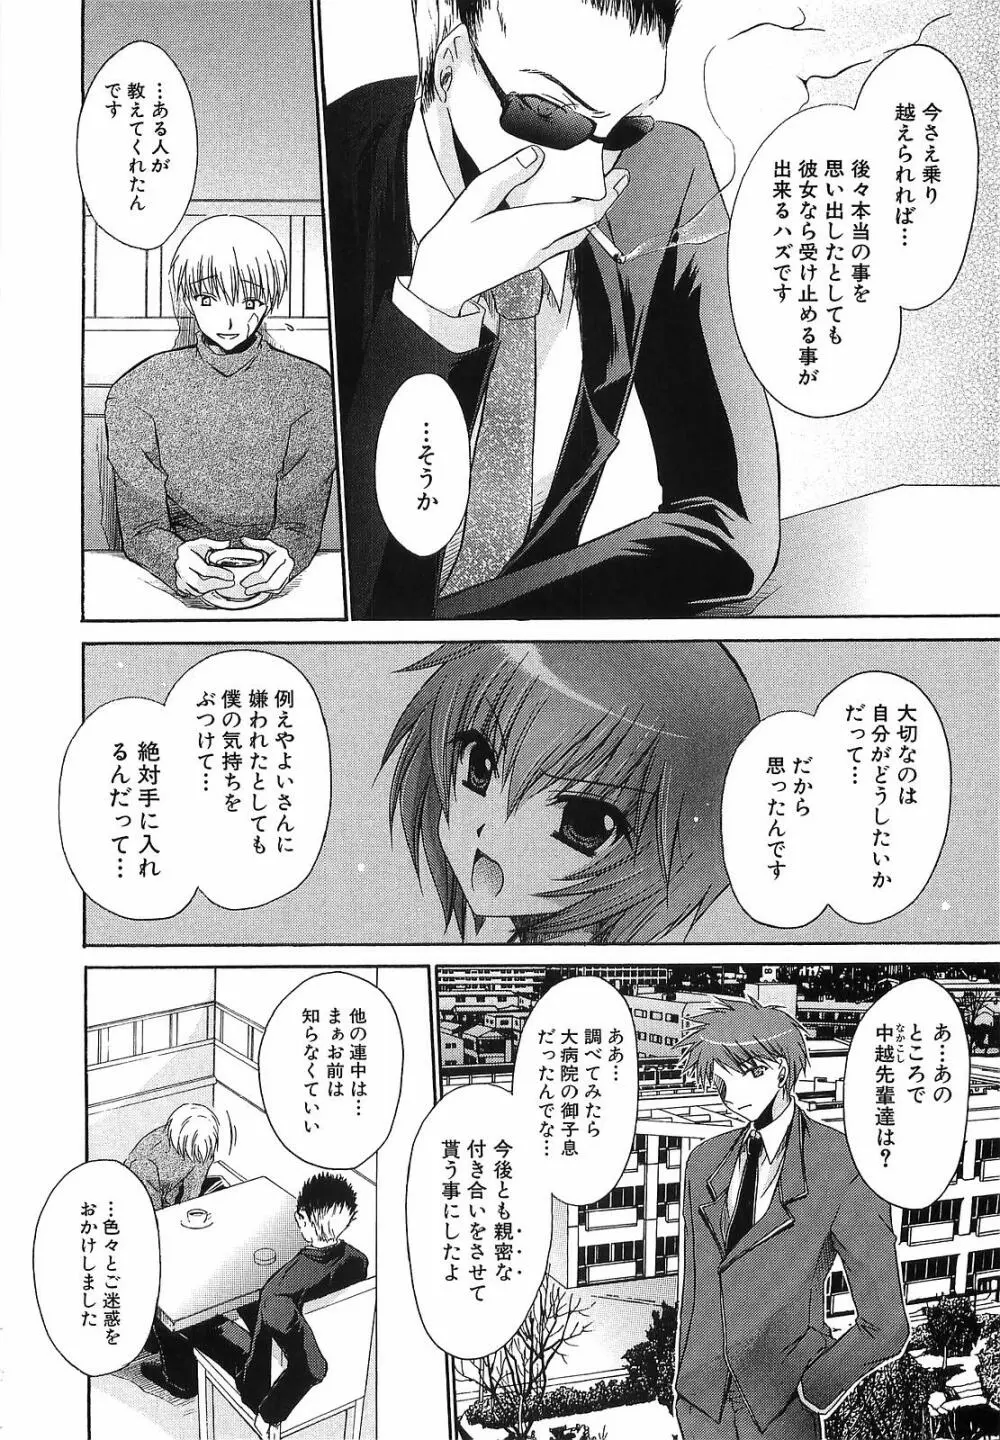 LOVE & HATE 3 FINAL～ENGAGE～通常版 Page.197